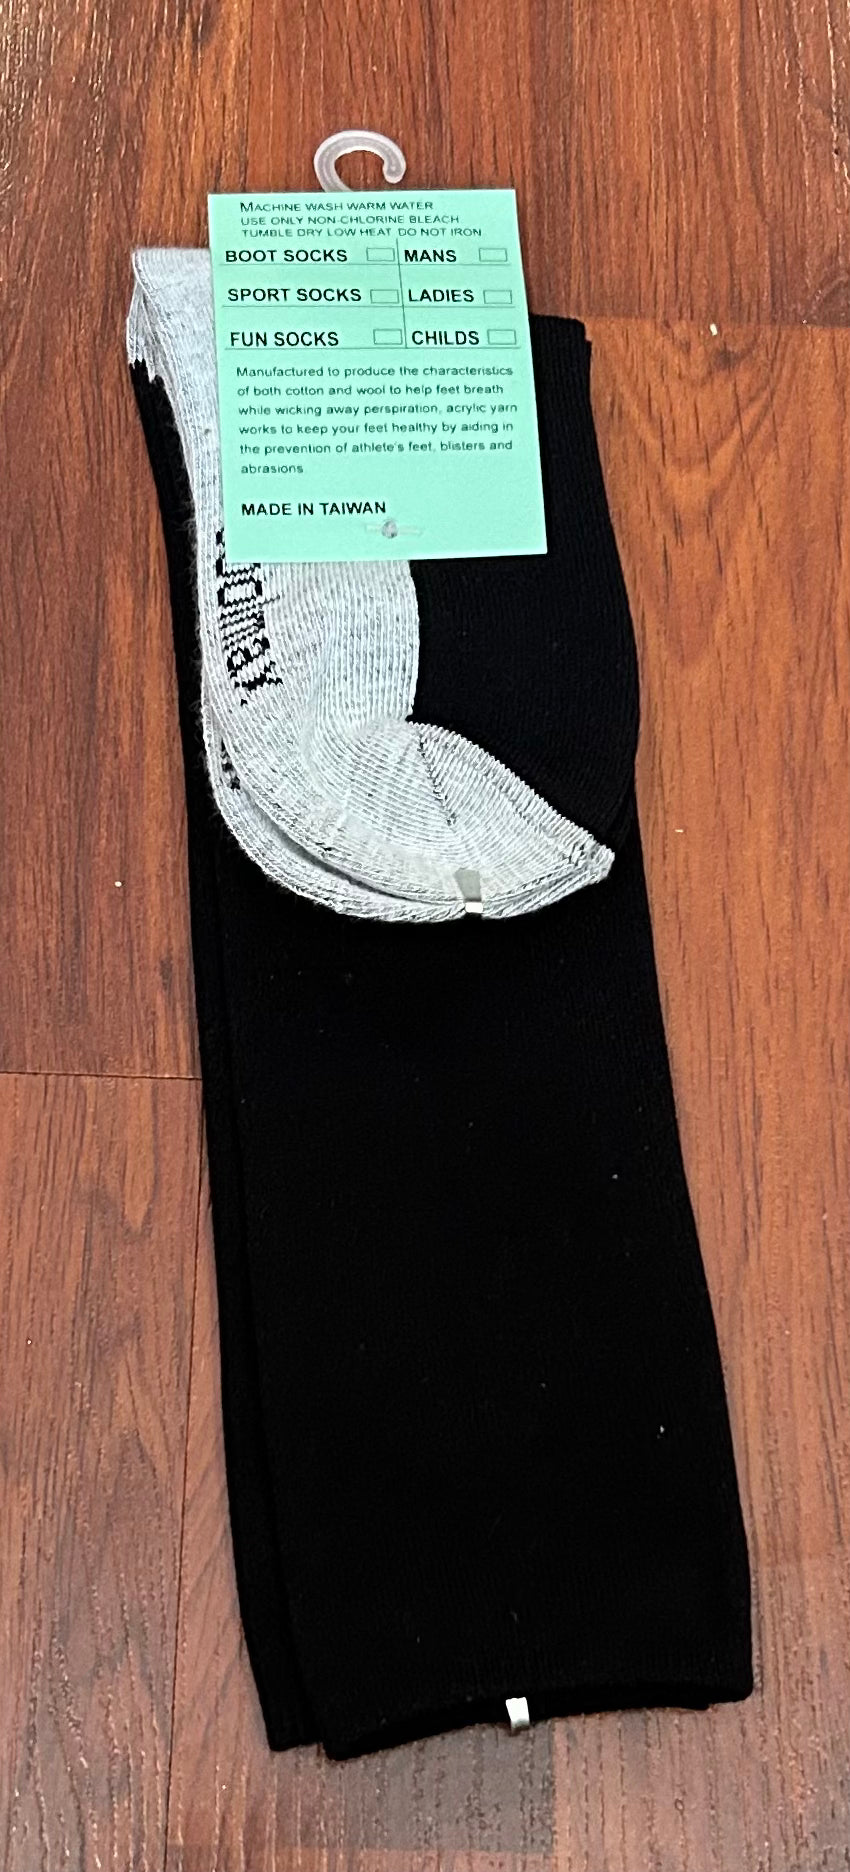 Exselle boot socks black and grey